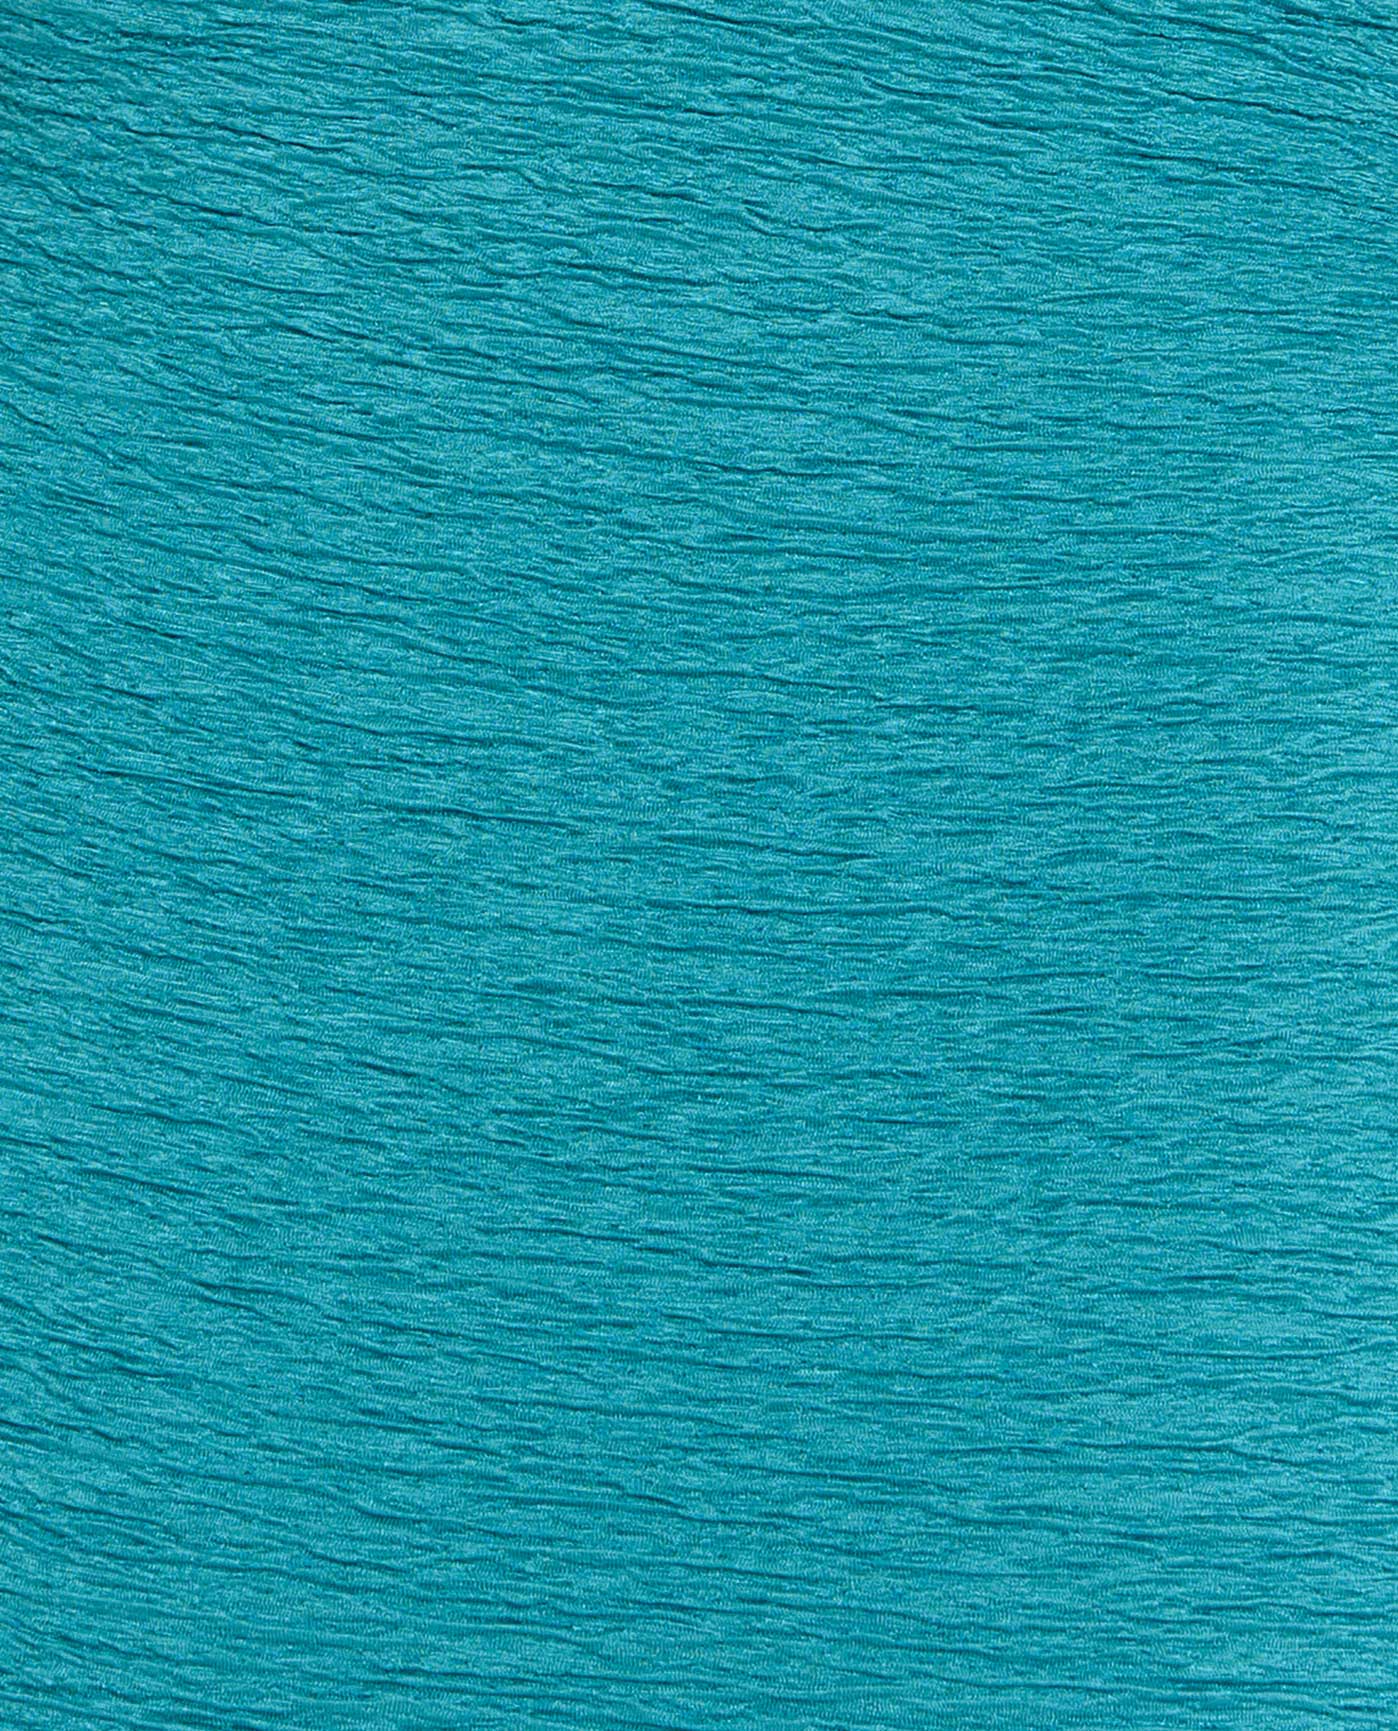 FABRIC SWATCH VIEW OF CHLORINE RESISTANT KRINKLE TEXTURED SOLID HIGH NECK ONE PIECE | KRINKLE ARUBA